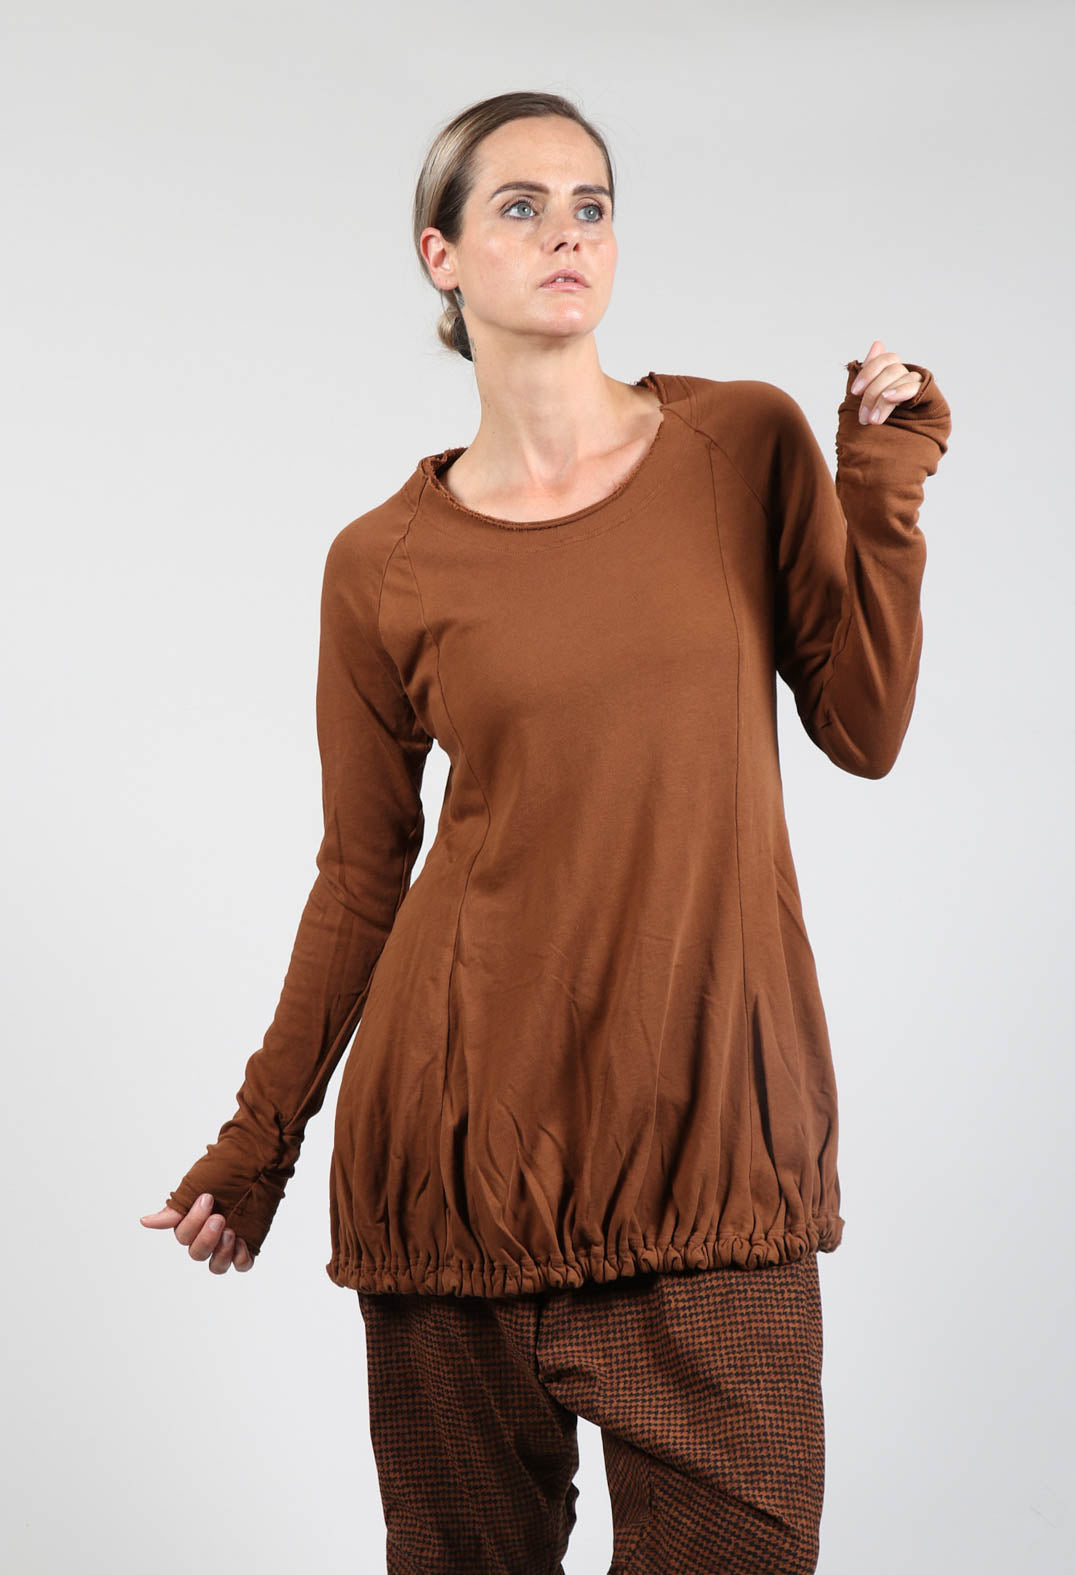 Long Sleeve Top with Gathered Hem in Brick